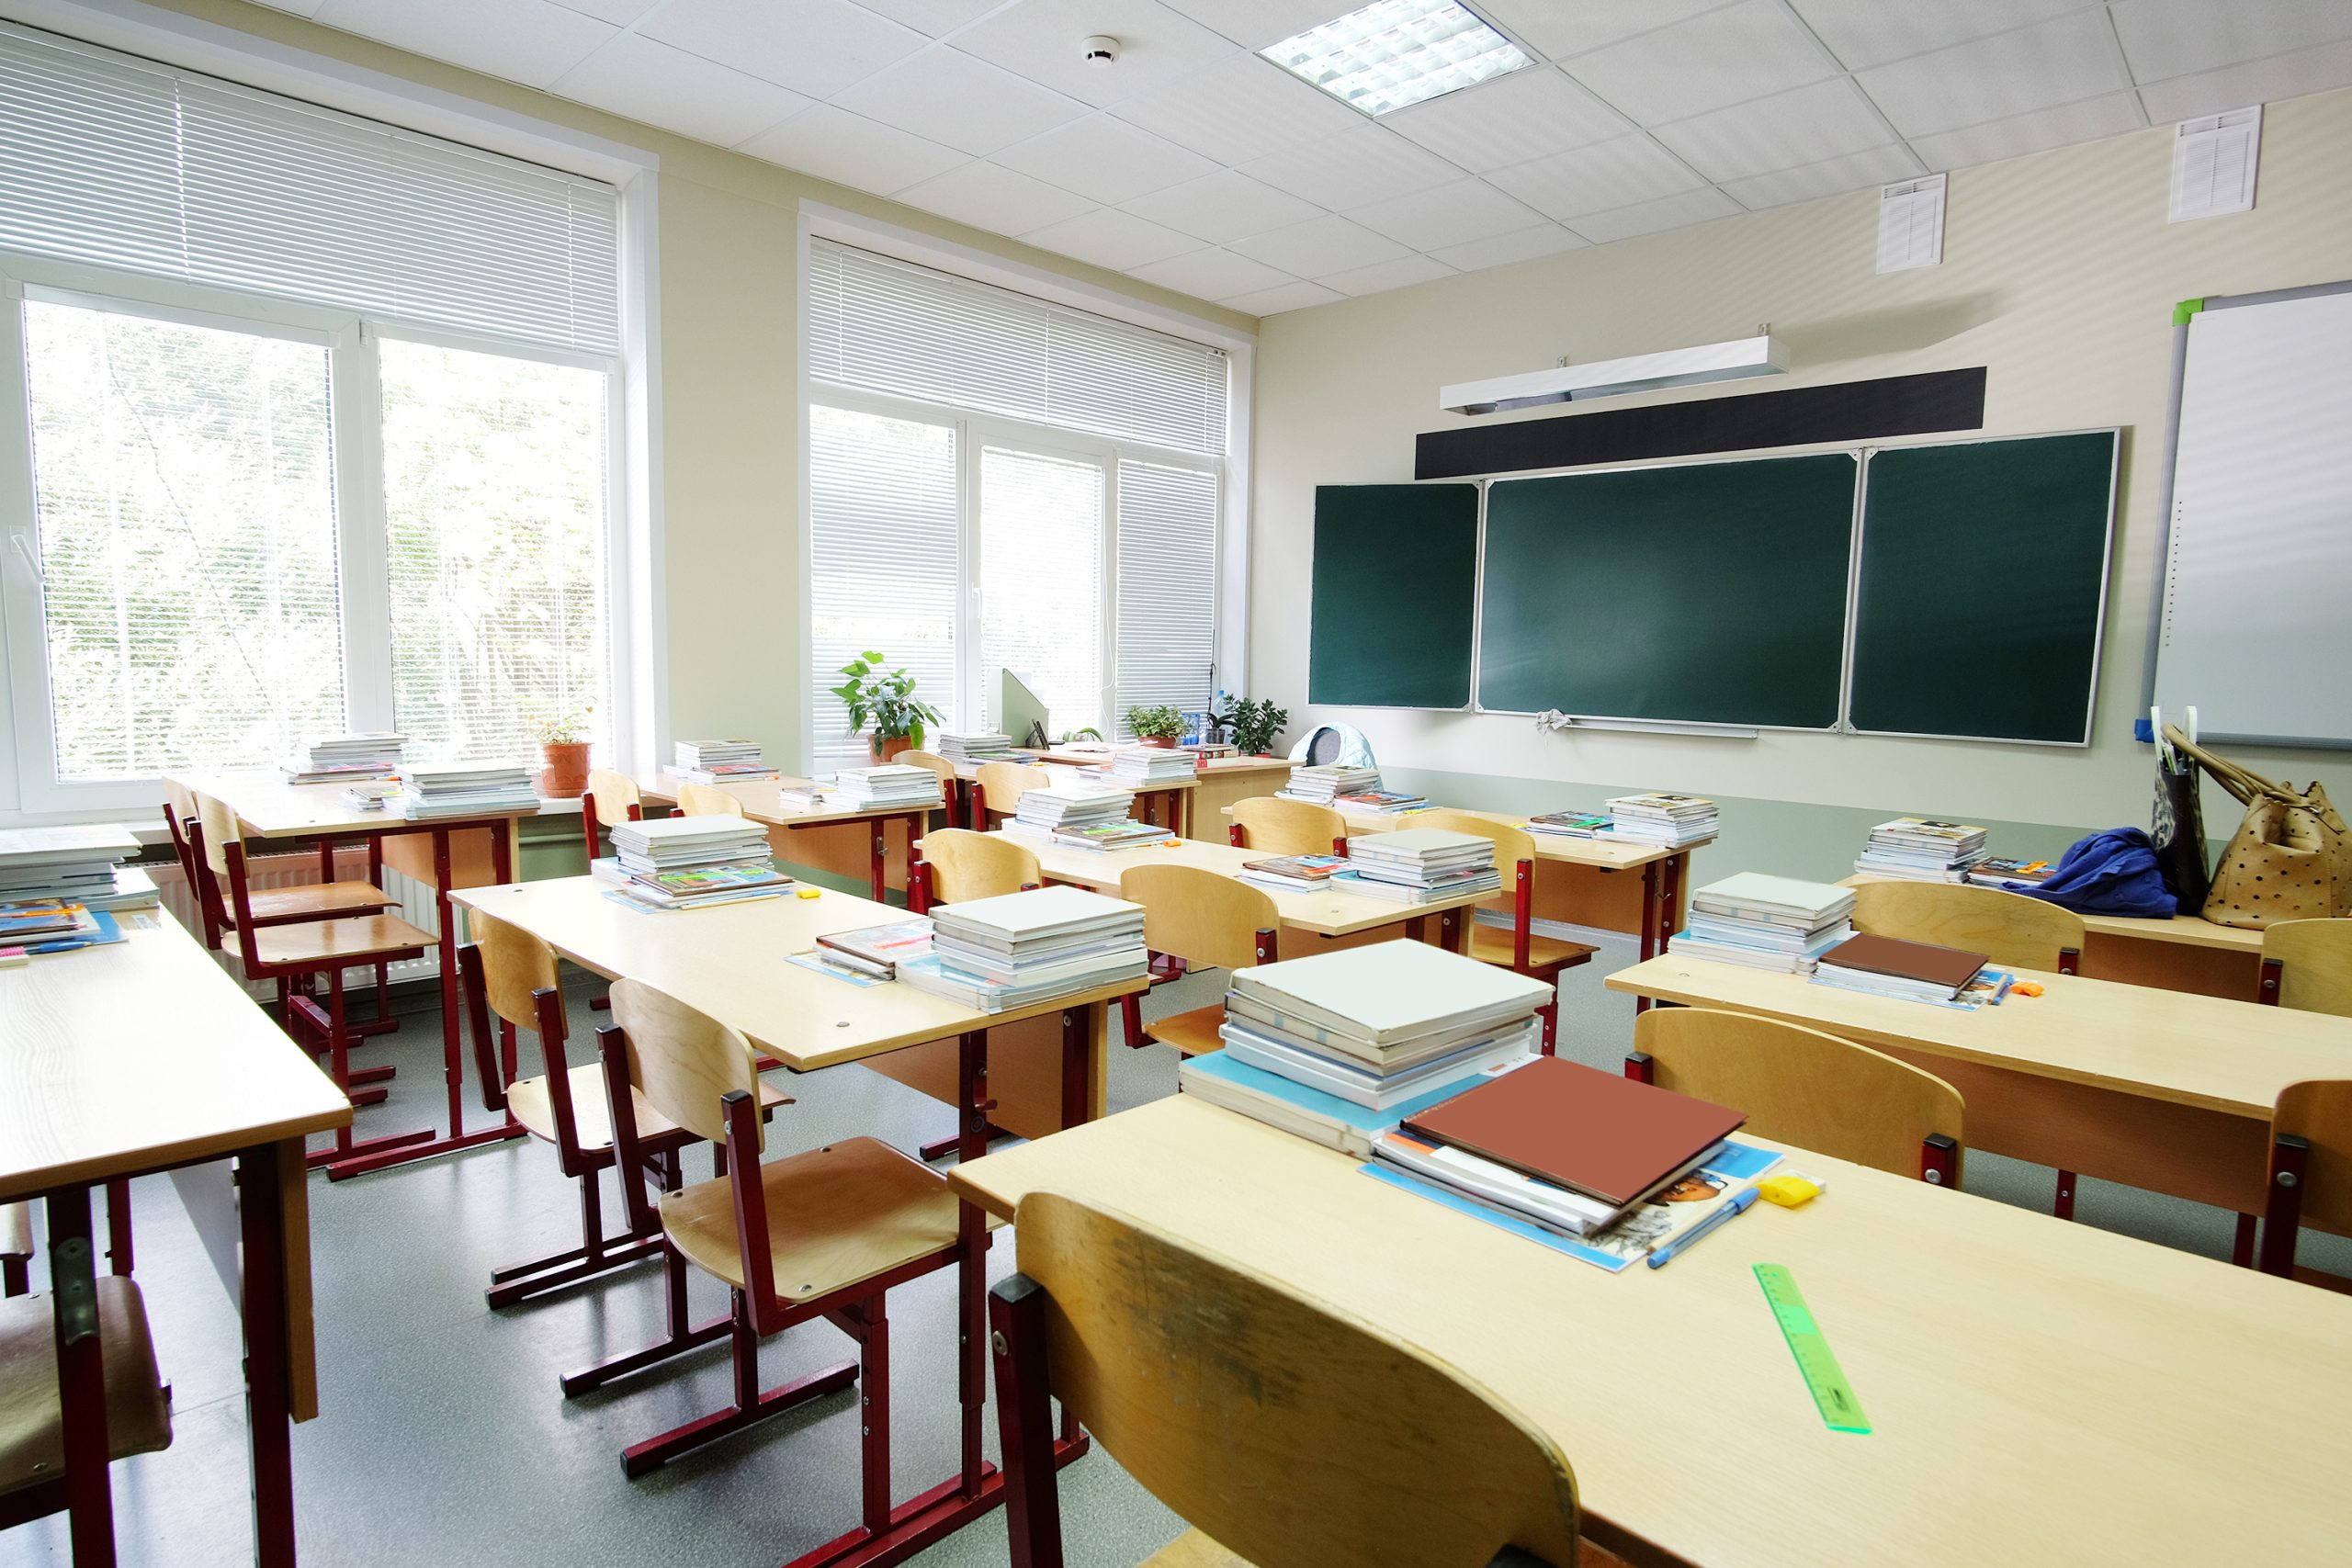 What are some tips for involving teachers and staff in school cleaning efforts?